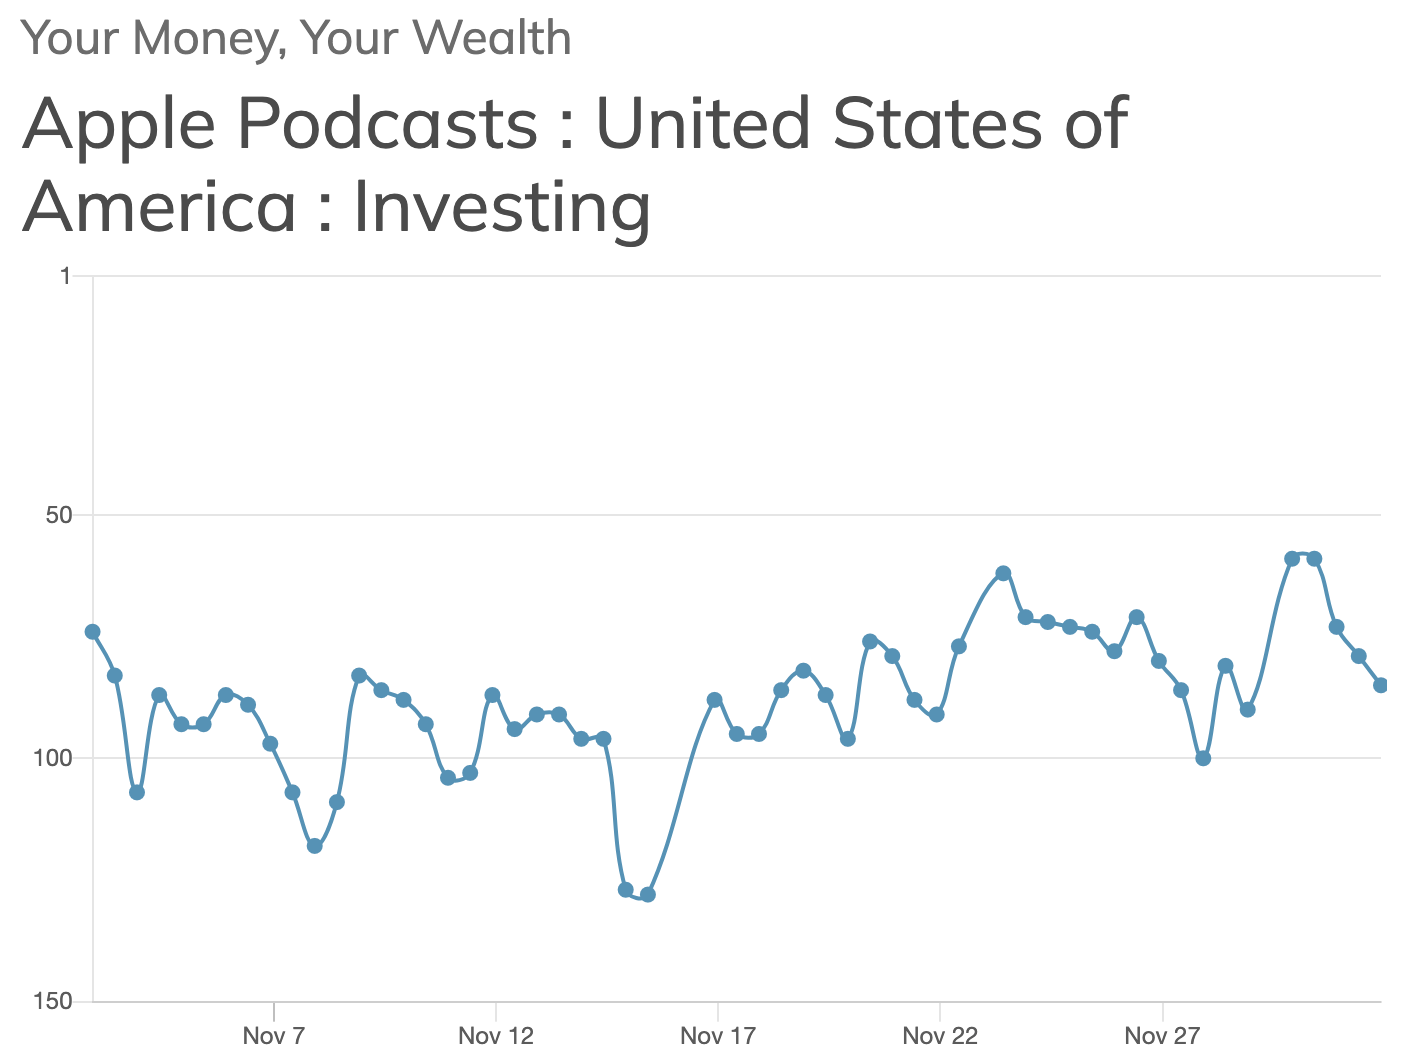 YMYW Apple Podcasts Investing Category Rank, November 2022